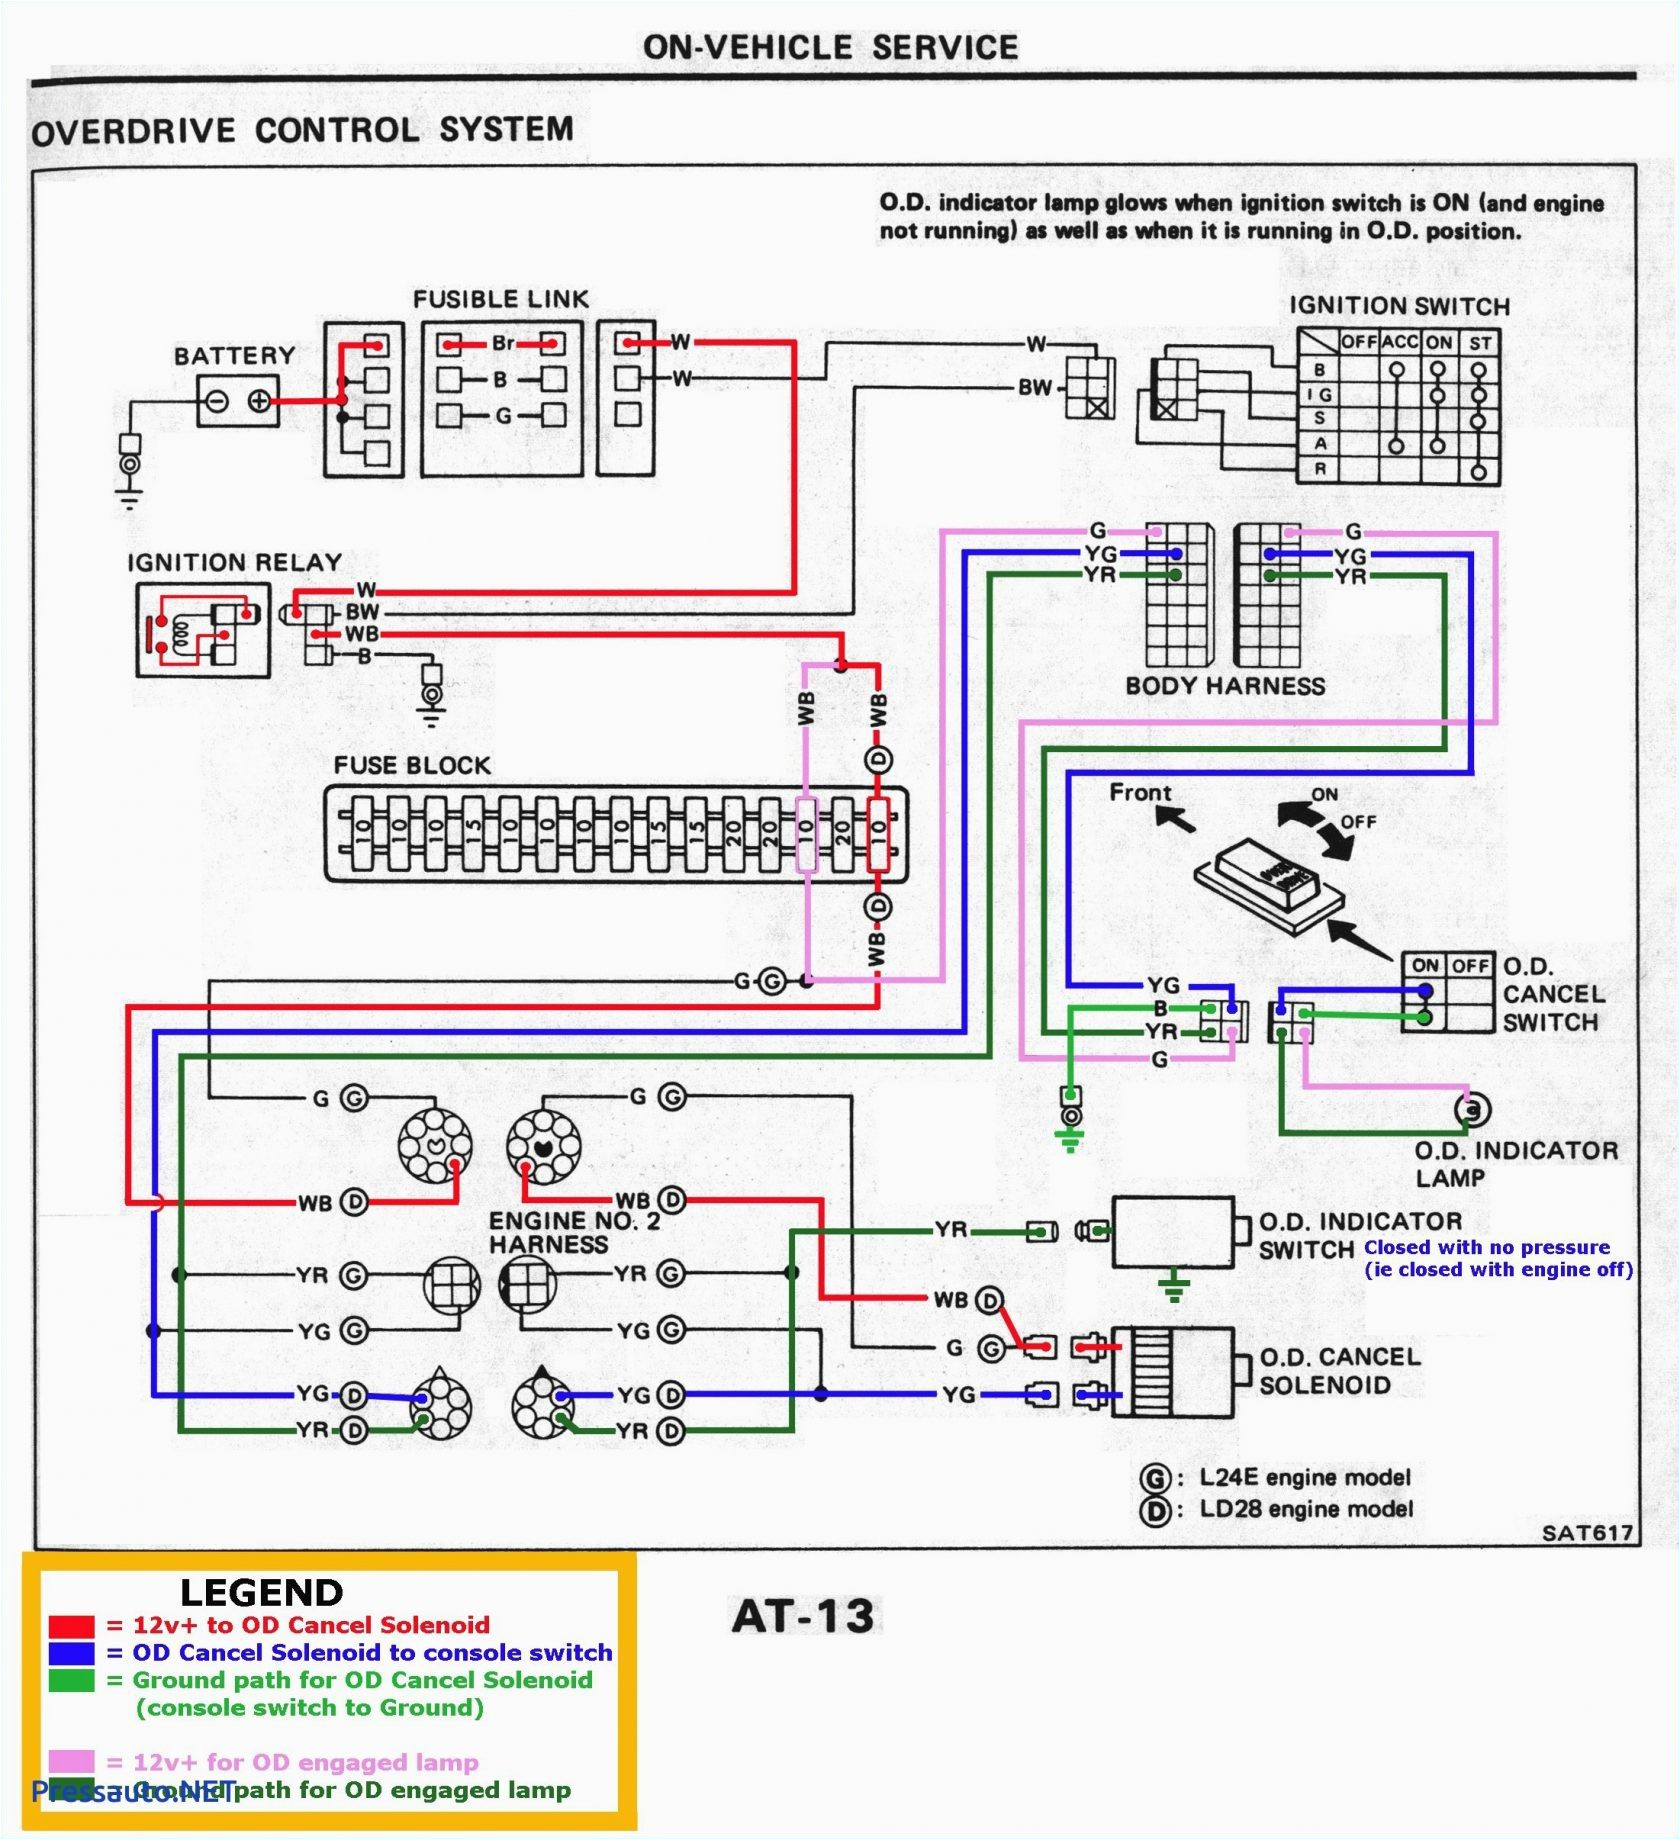 2001 chevy tahoe wiring diagram free picture wiring diagram rows